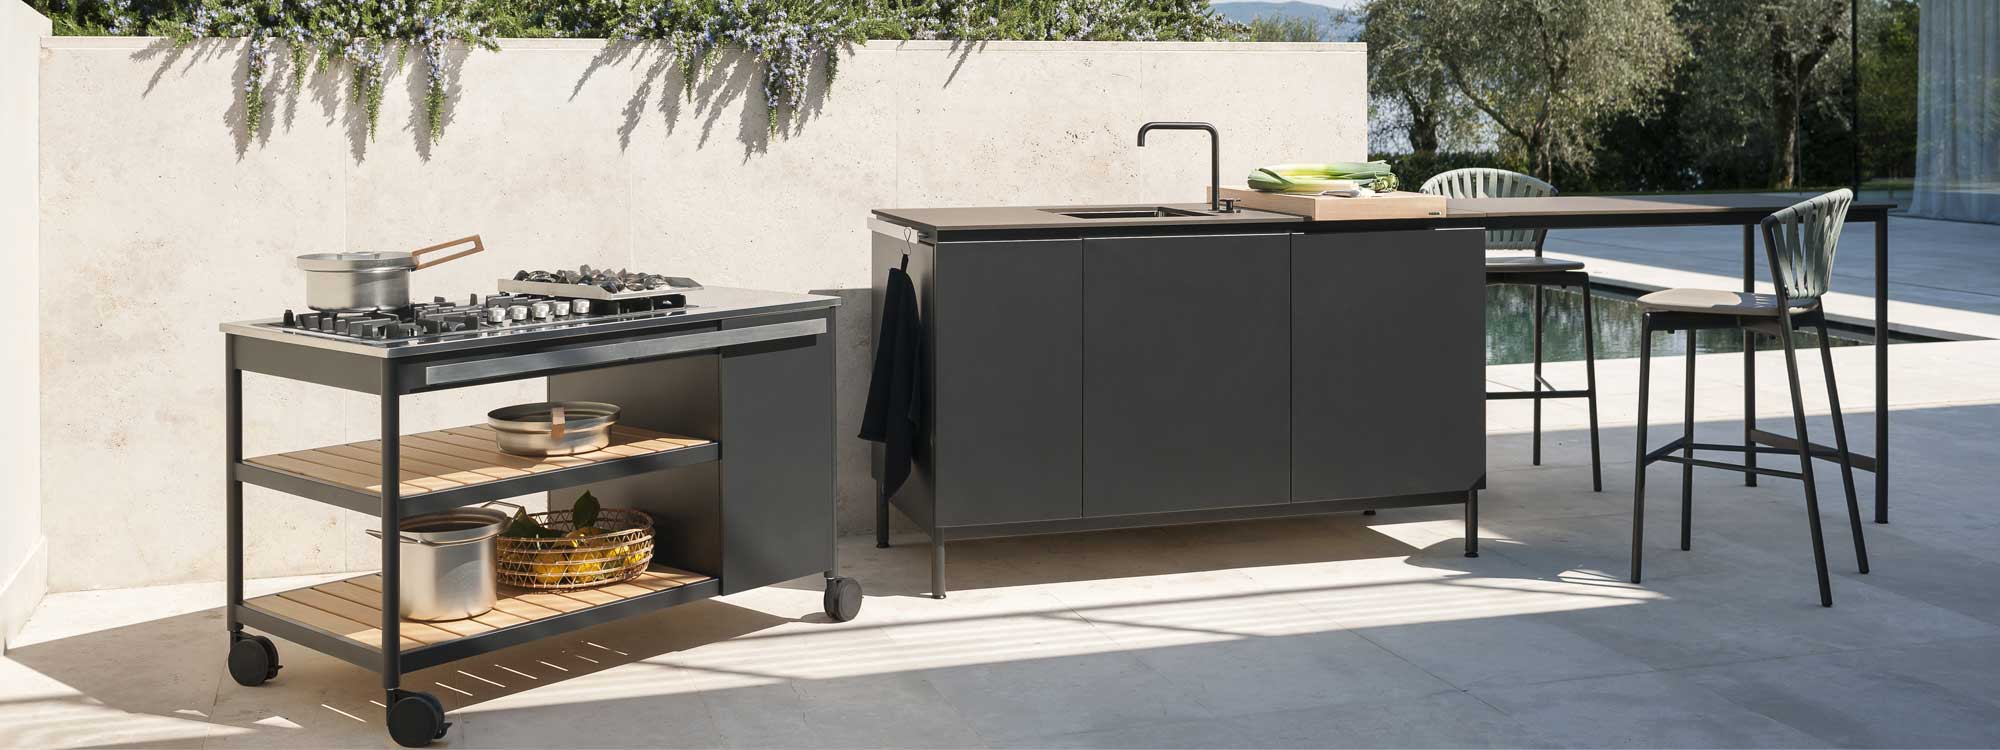 Norma outdoor kitchen is a modular BBQ & modern stainless steel BBQ by Rodolfo Dordoni for RODA luxury quality BBQ company, Italy.